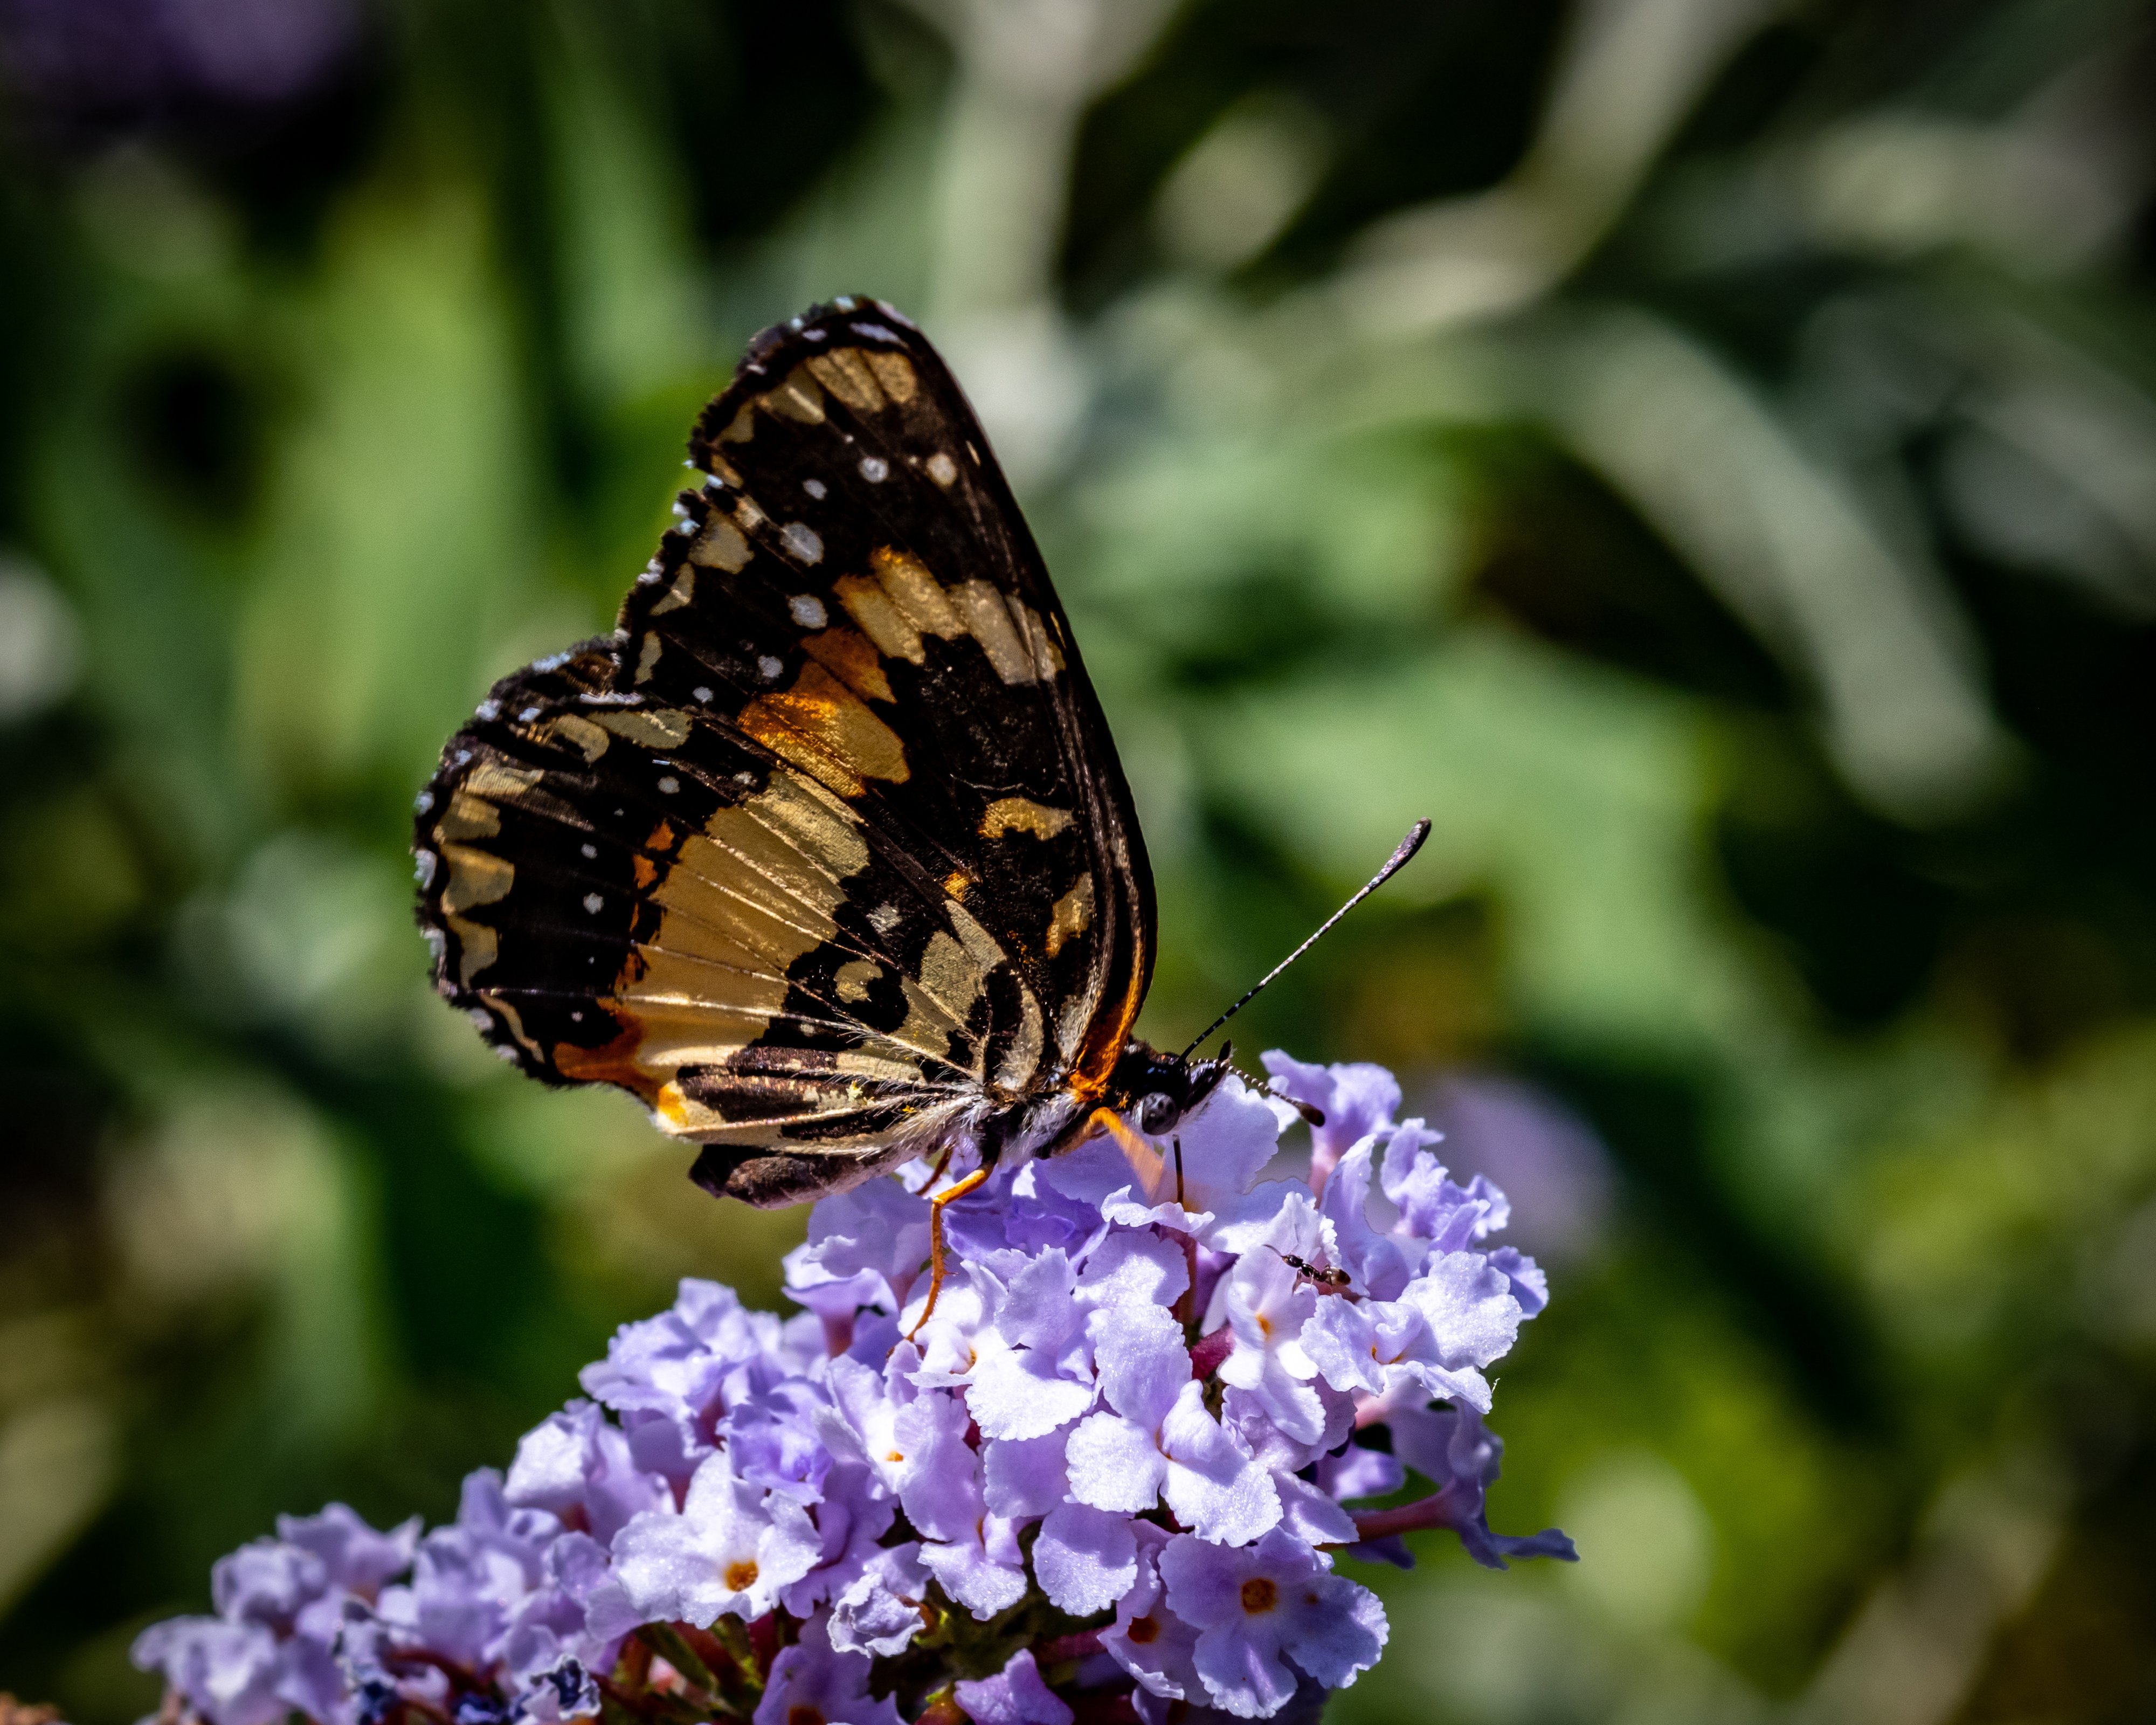 On the Butterfly Bush